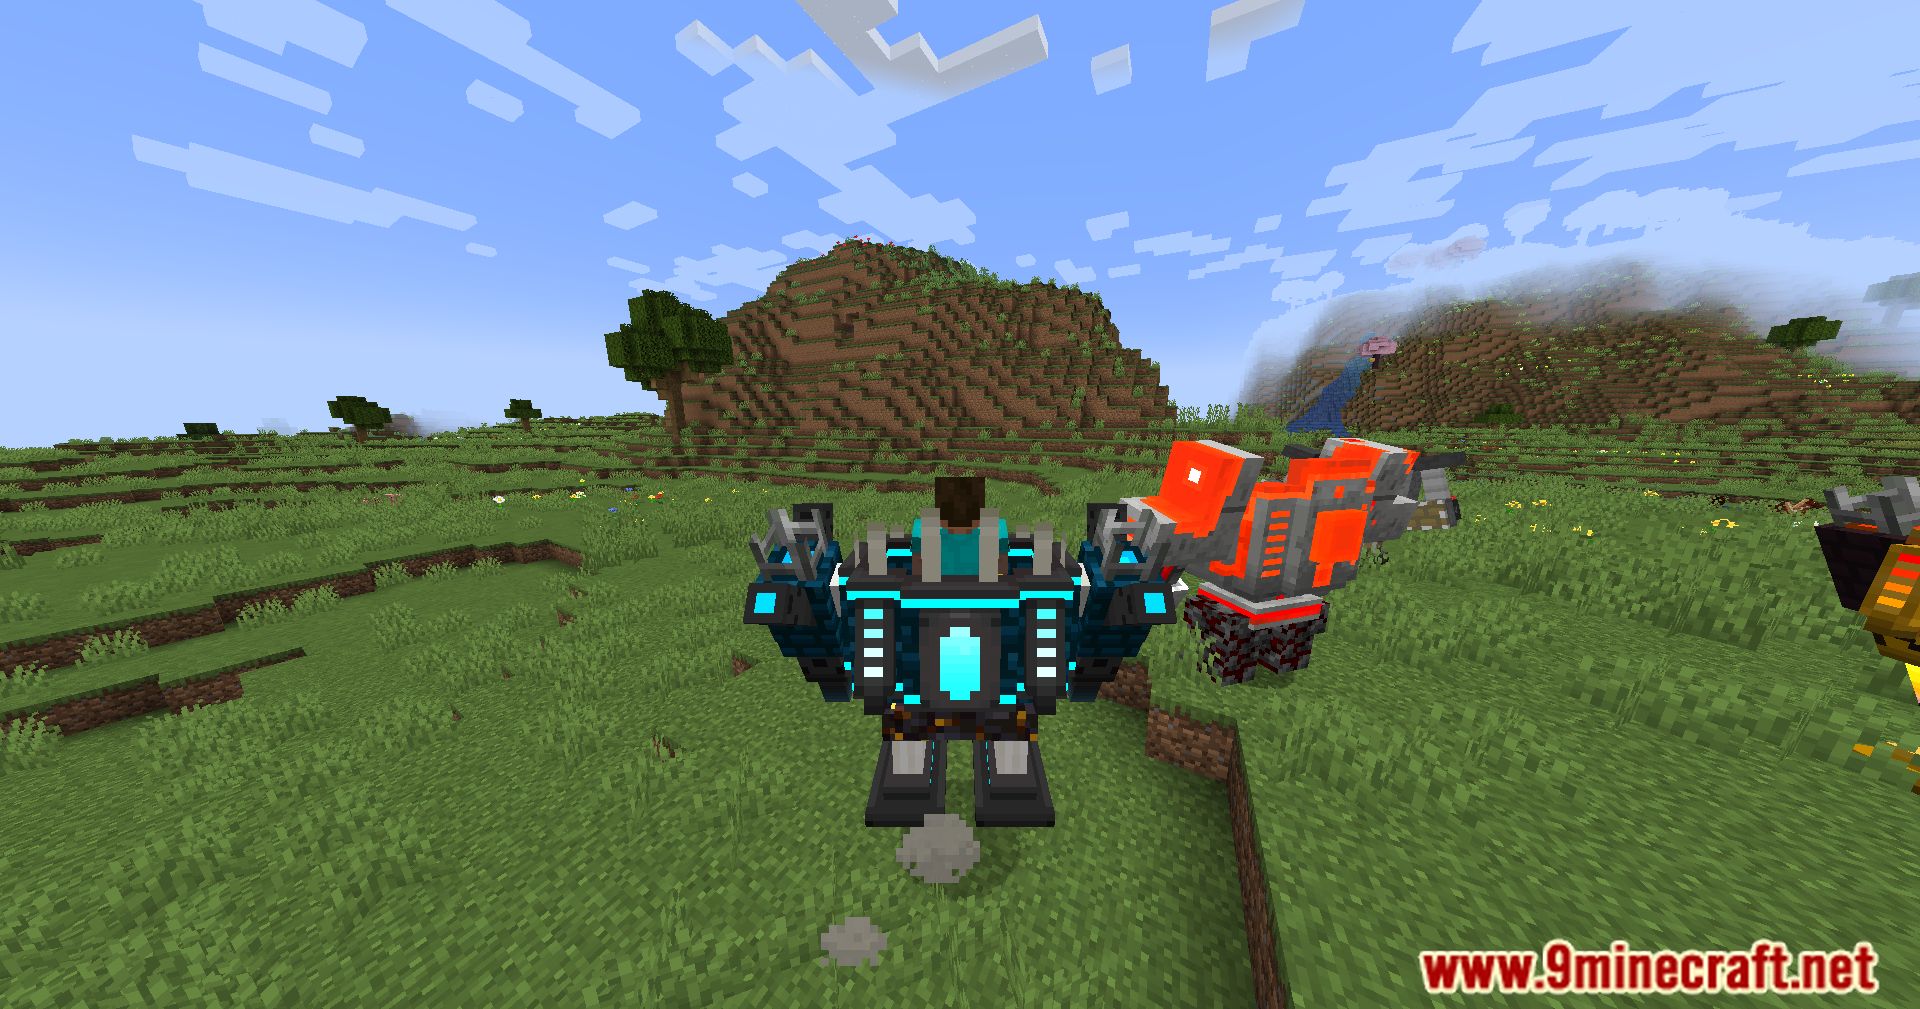 Armored Redstone Mod (1.20.1, 1.19.3) - Forge Your Path With Redstone-Powered Adventures! 16